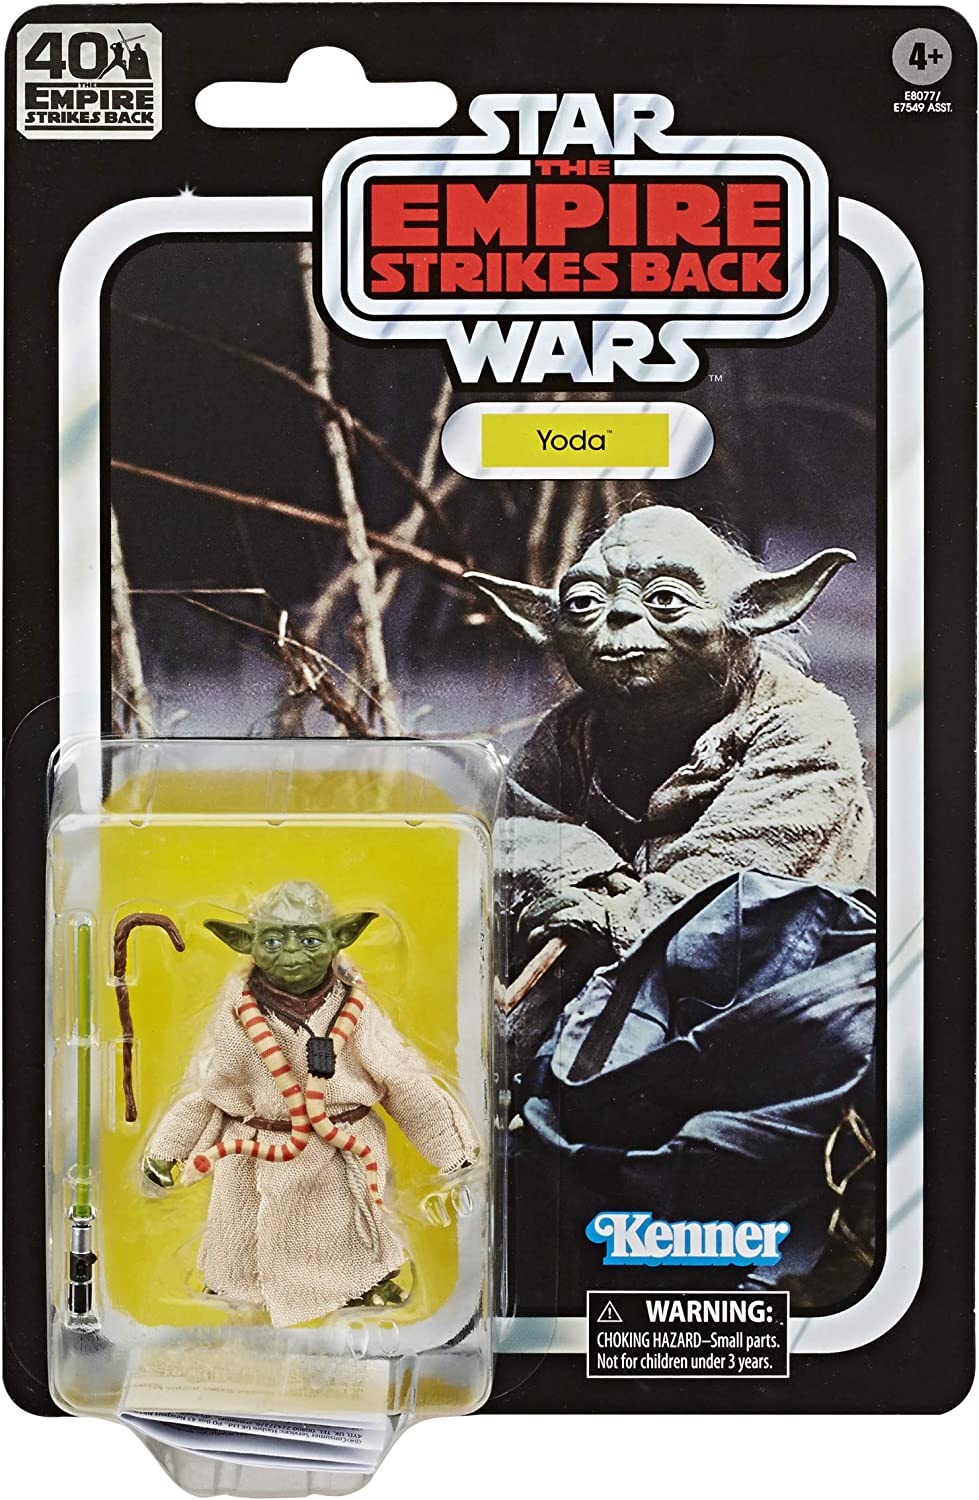 STAR WARS The Black Series Yoda 6-inch Scale The Empire Strikes Back 40TH Anniversary Collectible Figure